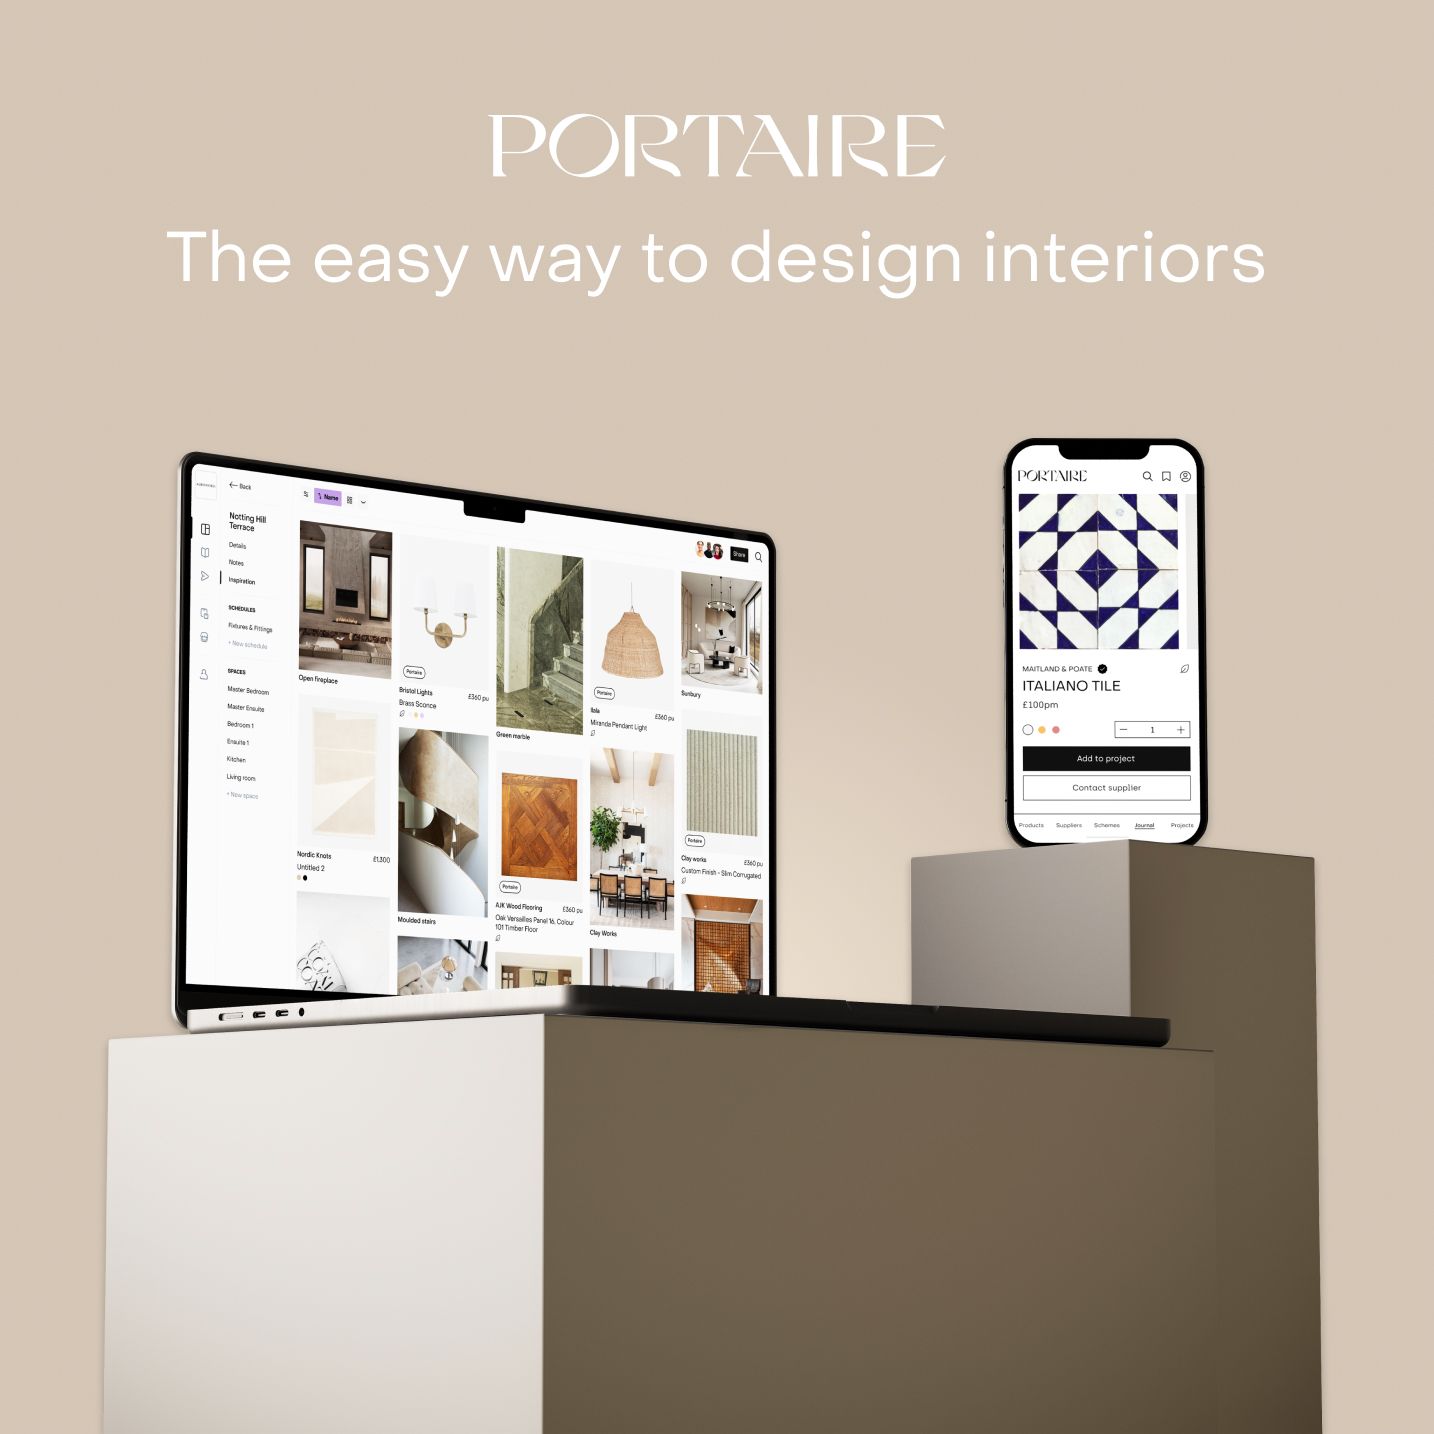 Portaire has partnered with Clerkernwell Design Week to offer designers an immersive experience in the heart of London's design district.